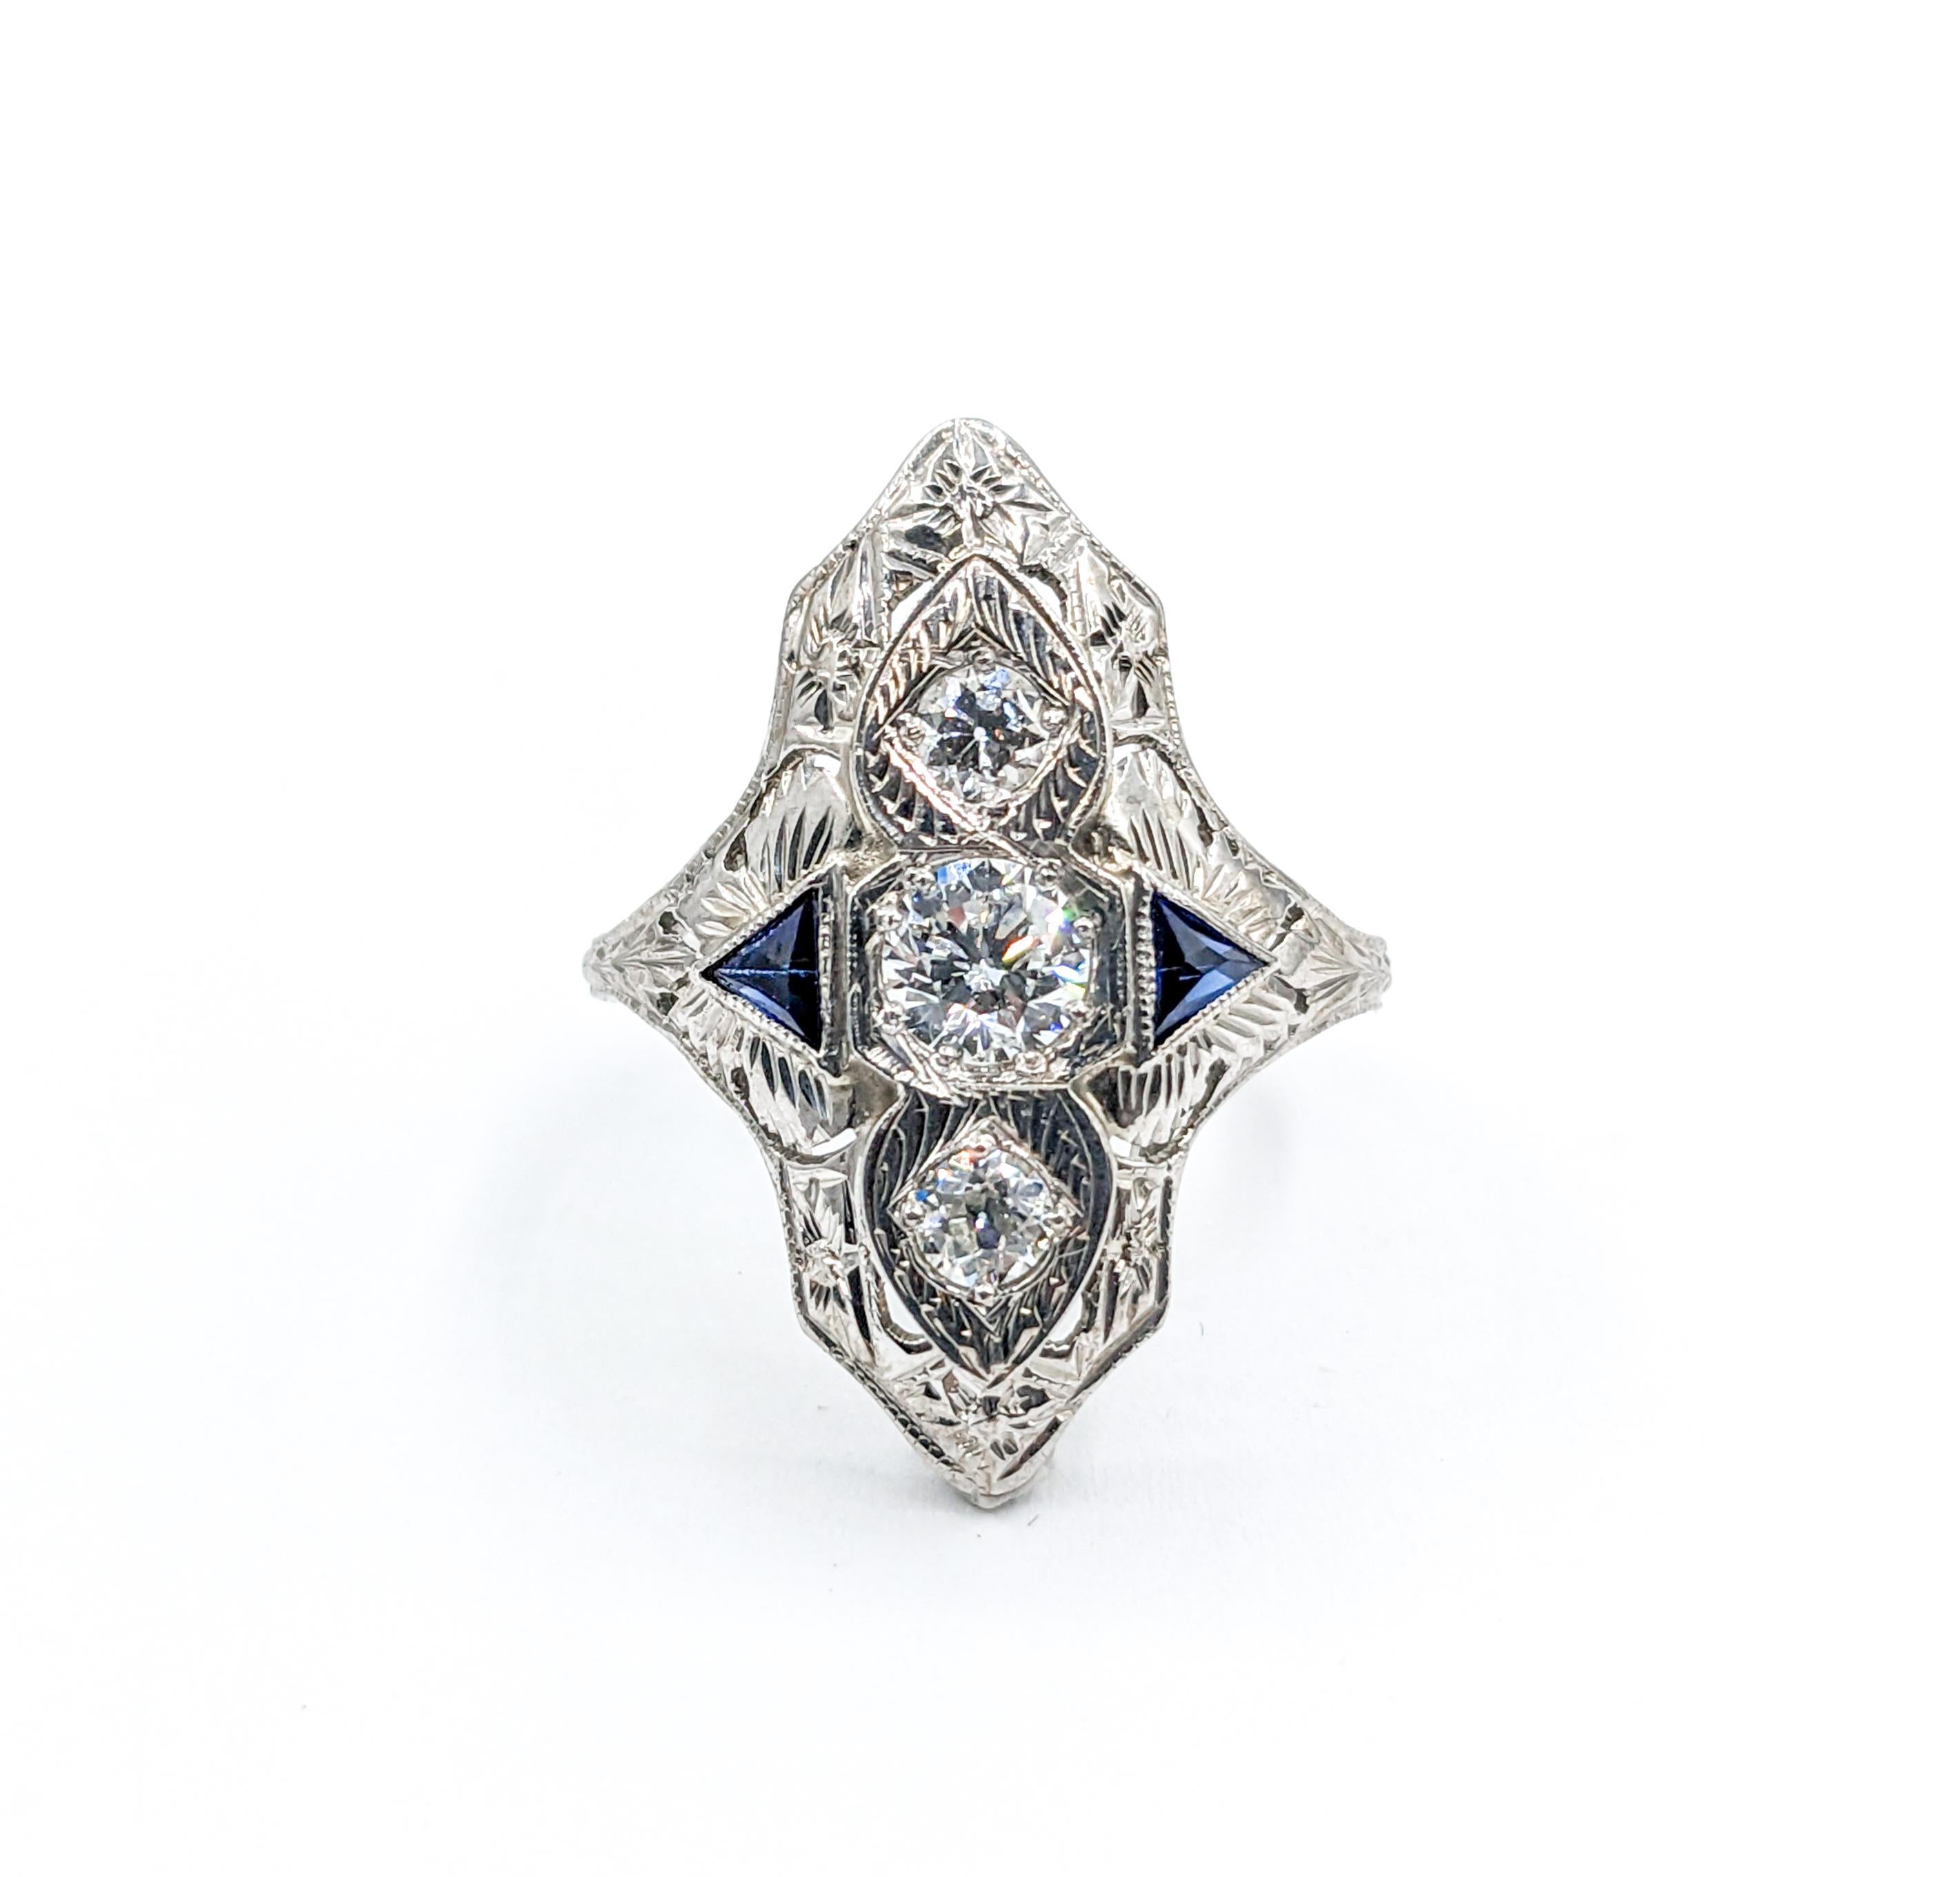 Fabulous Art Deco Diamond & Synthetic Sapphire Ring

Immerse yourself in the age of sophistication with this art deco ring. Precisely crafted in 18k white gold, its design harkens back to an era of unmatched style. At its core, the ring boasts